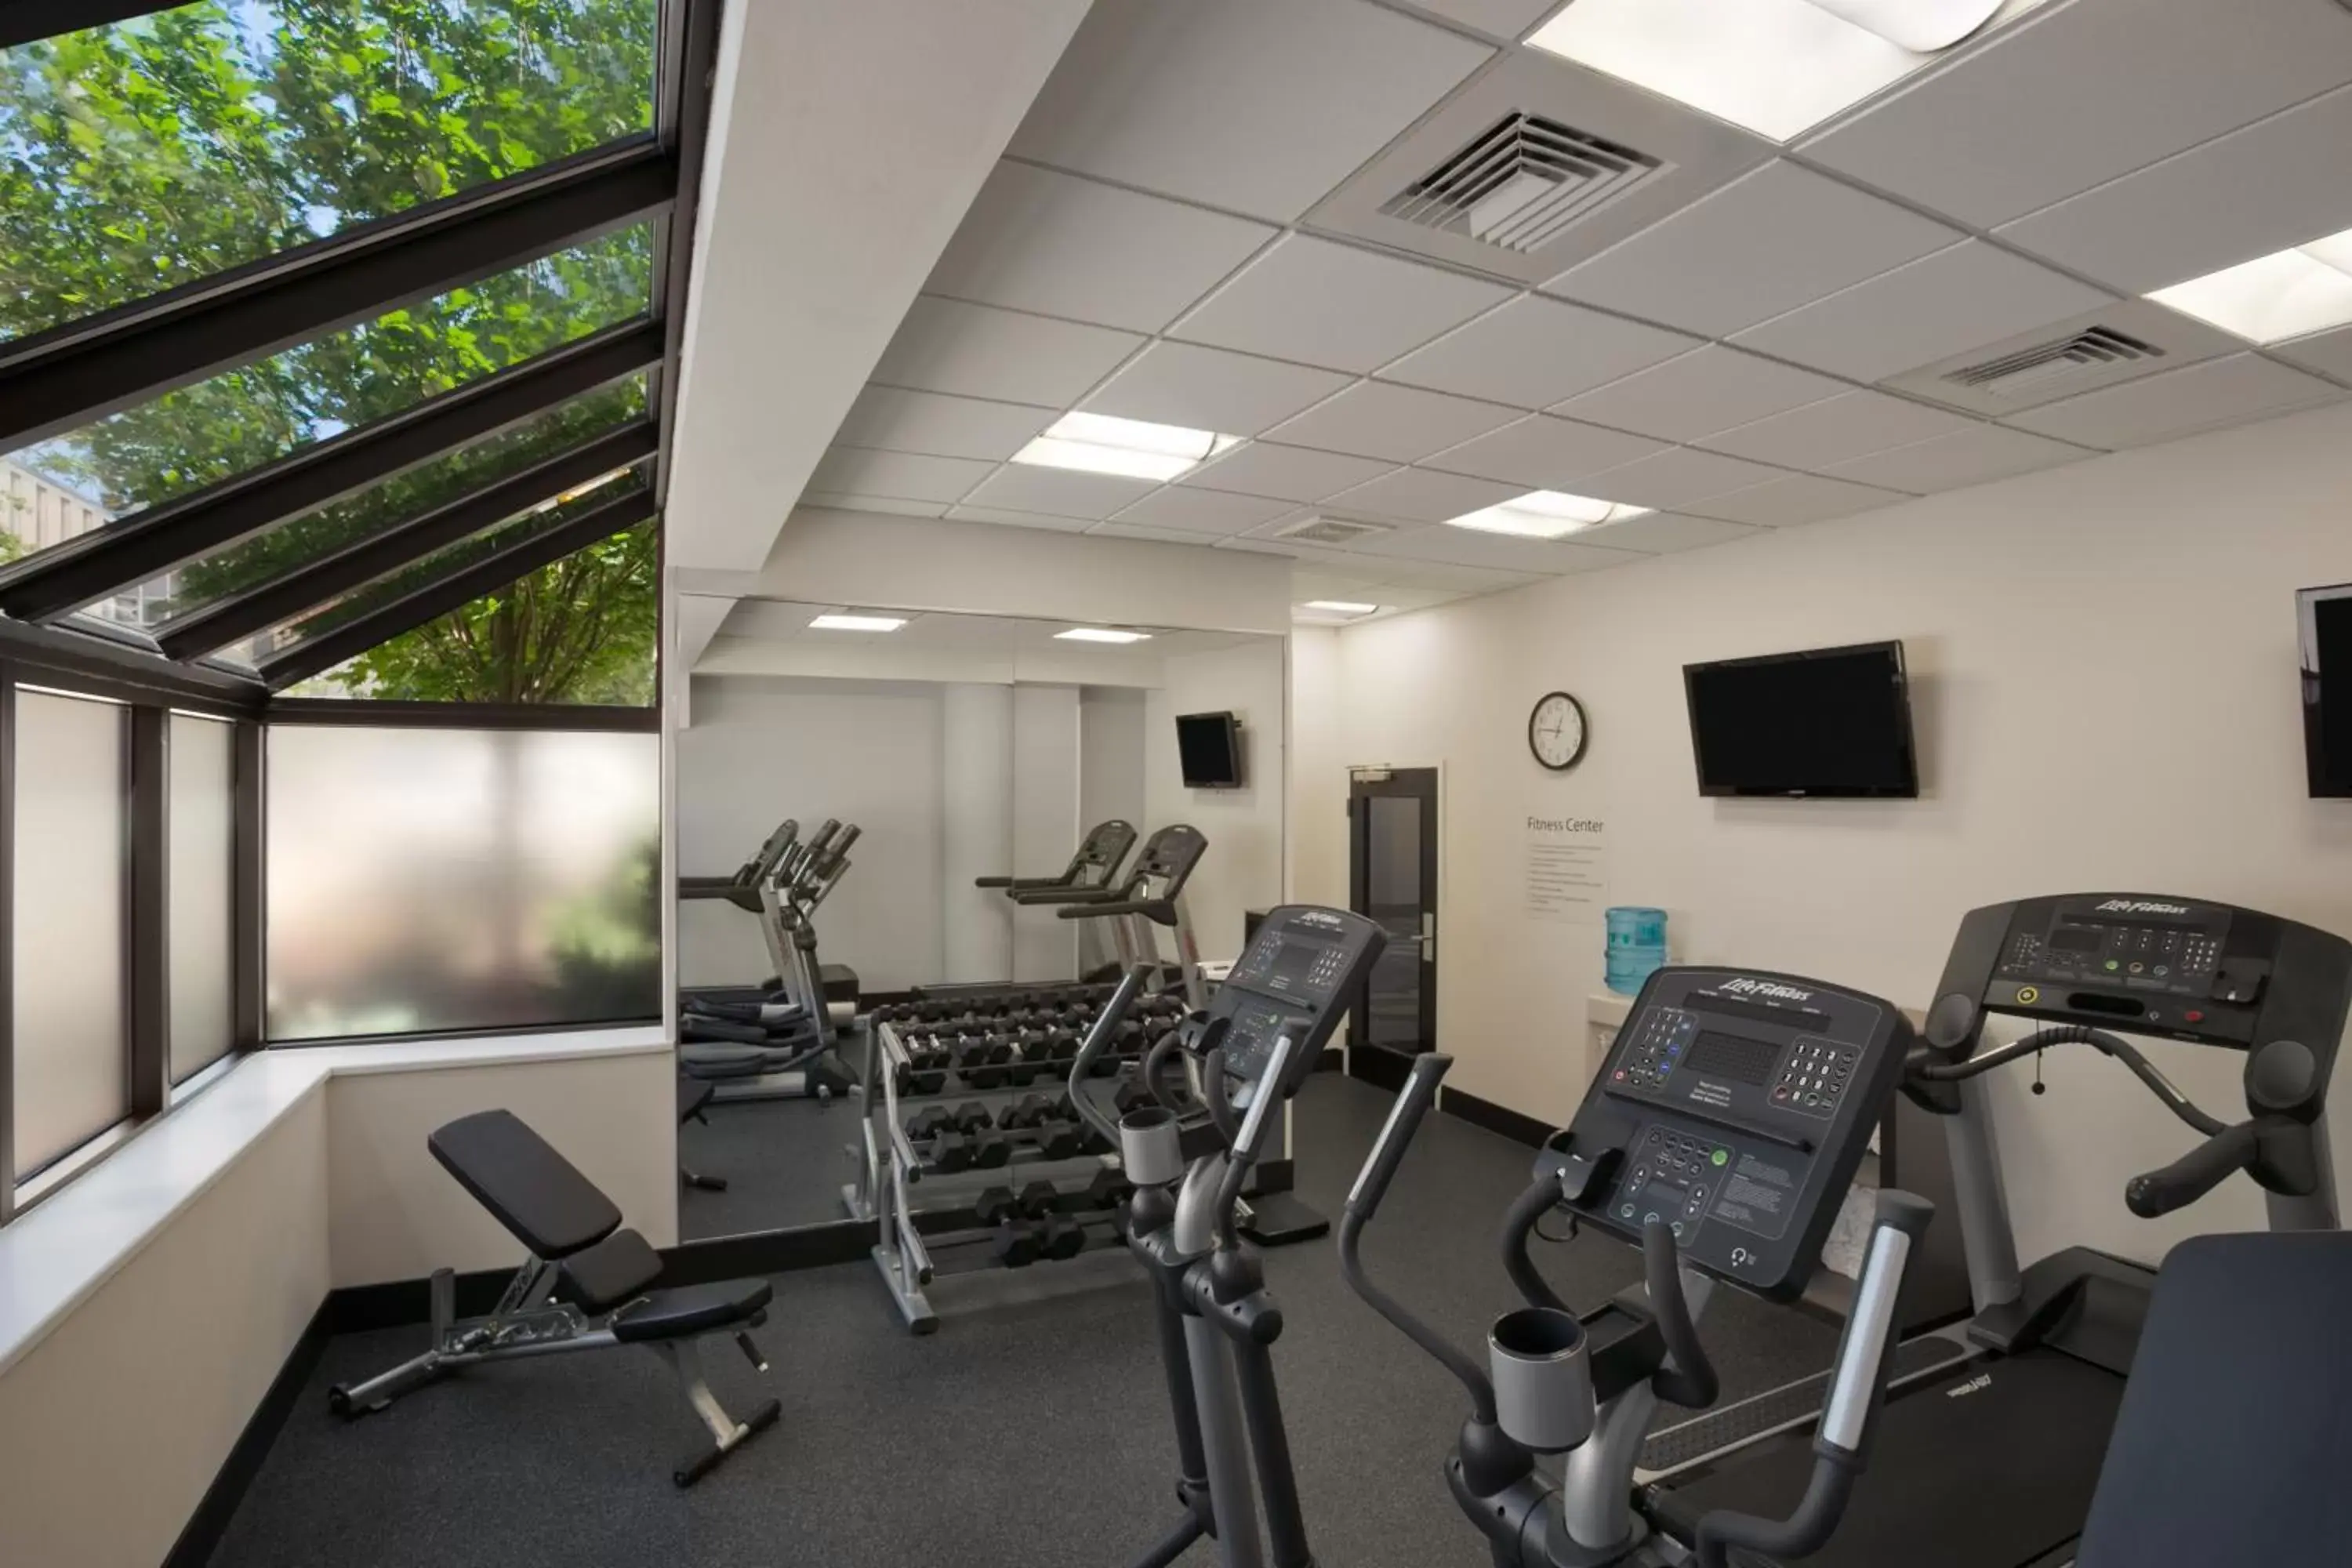 Fitness centre/facilities, Fitness Center/Facilities in Wyndham Pittsburgh University Center